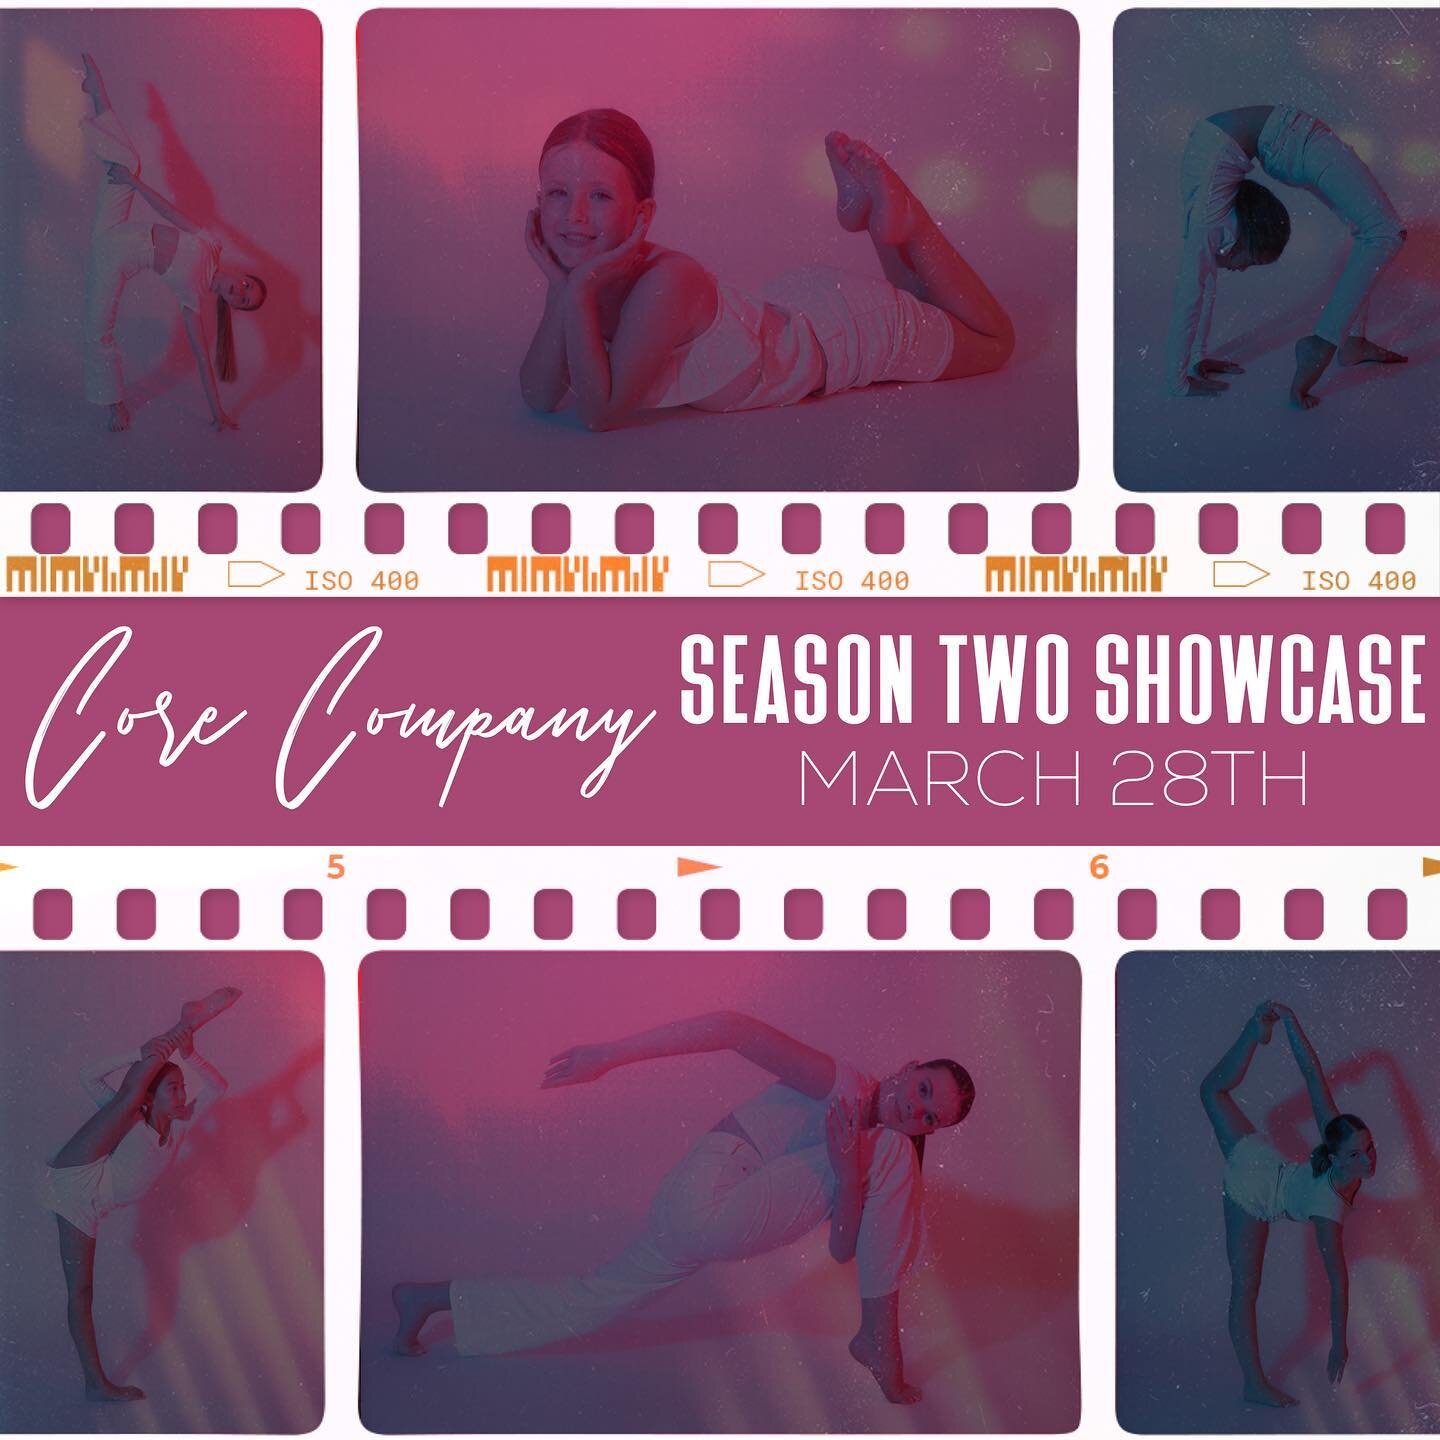 Who&rsquo;s ready for our Season Two Company Showcase week!? The countdown is on until our competitive dancers hit the stage at our group showcase and solo/duo/trio showcase 🌟 Deets below ⬇️

Company Group Showcase - Thursday, March 28th @ The Playh